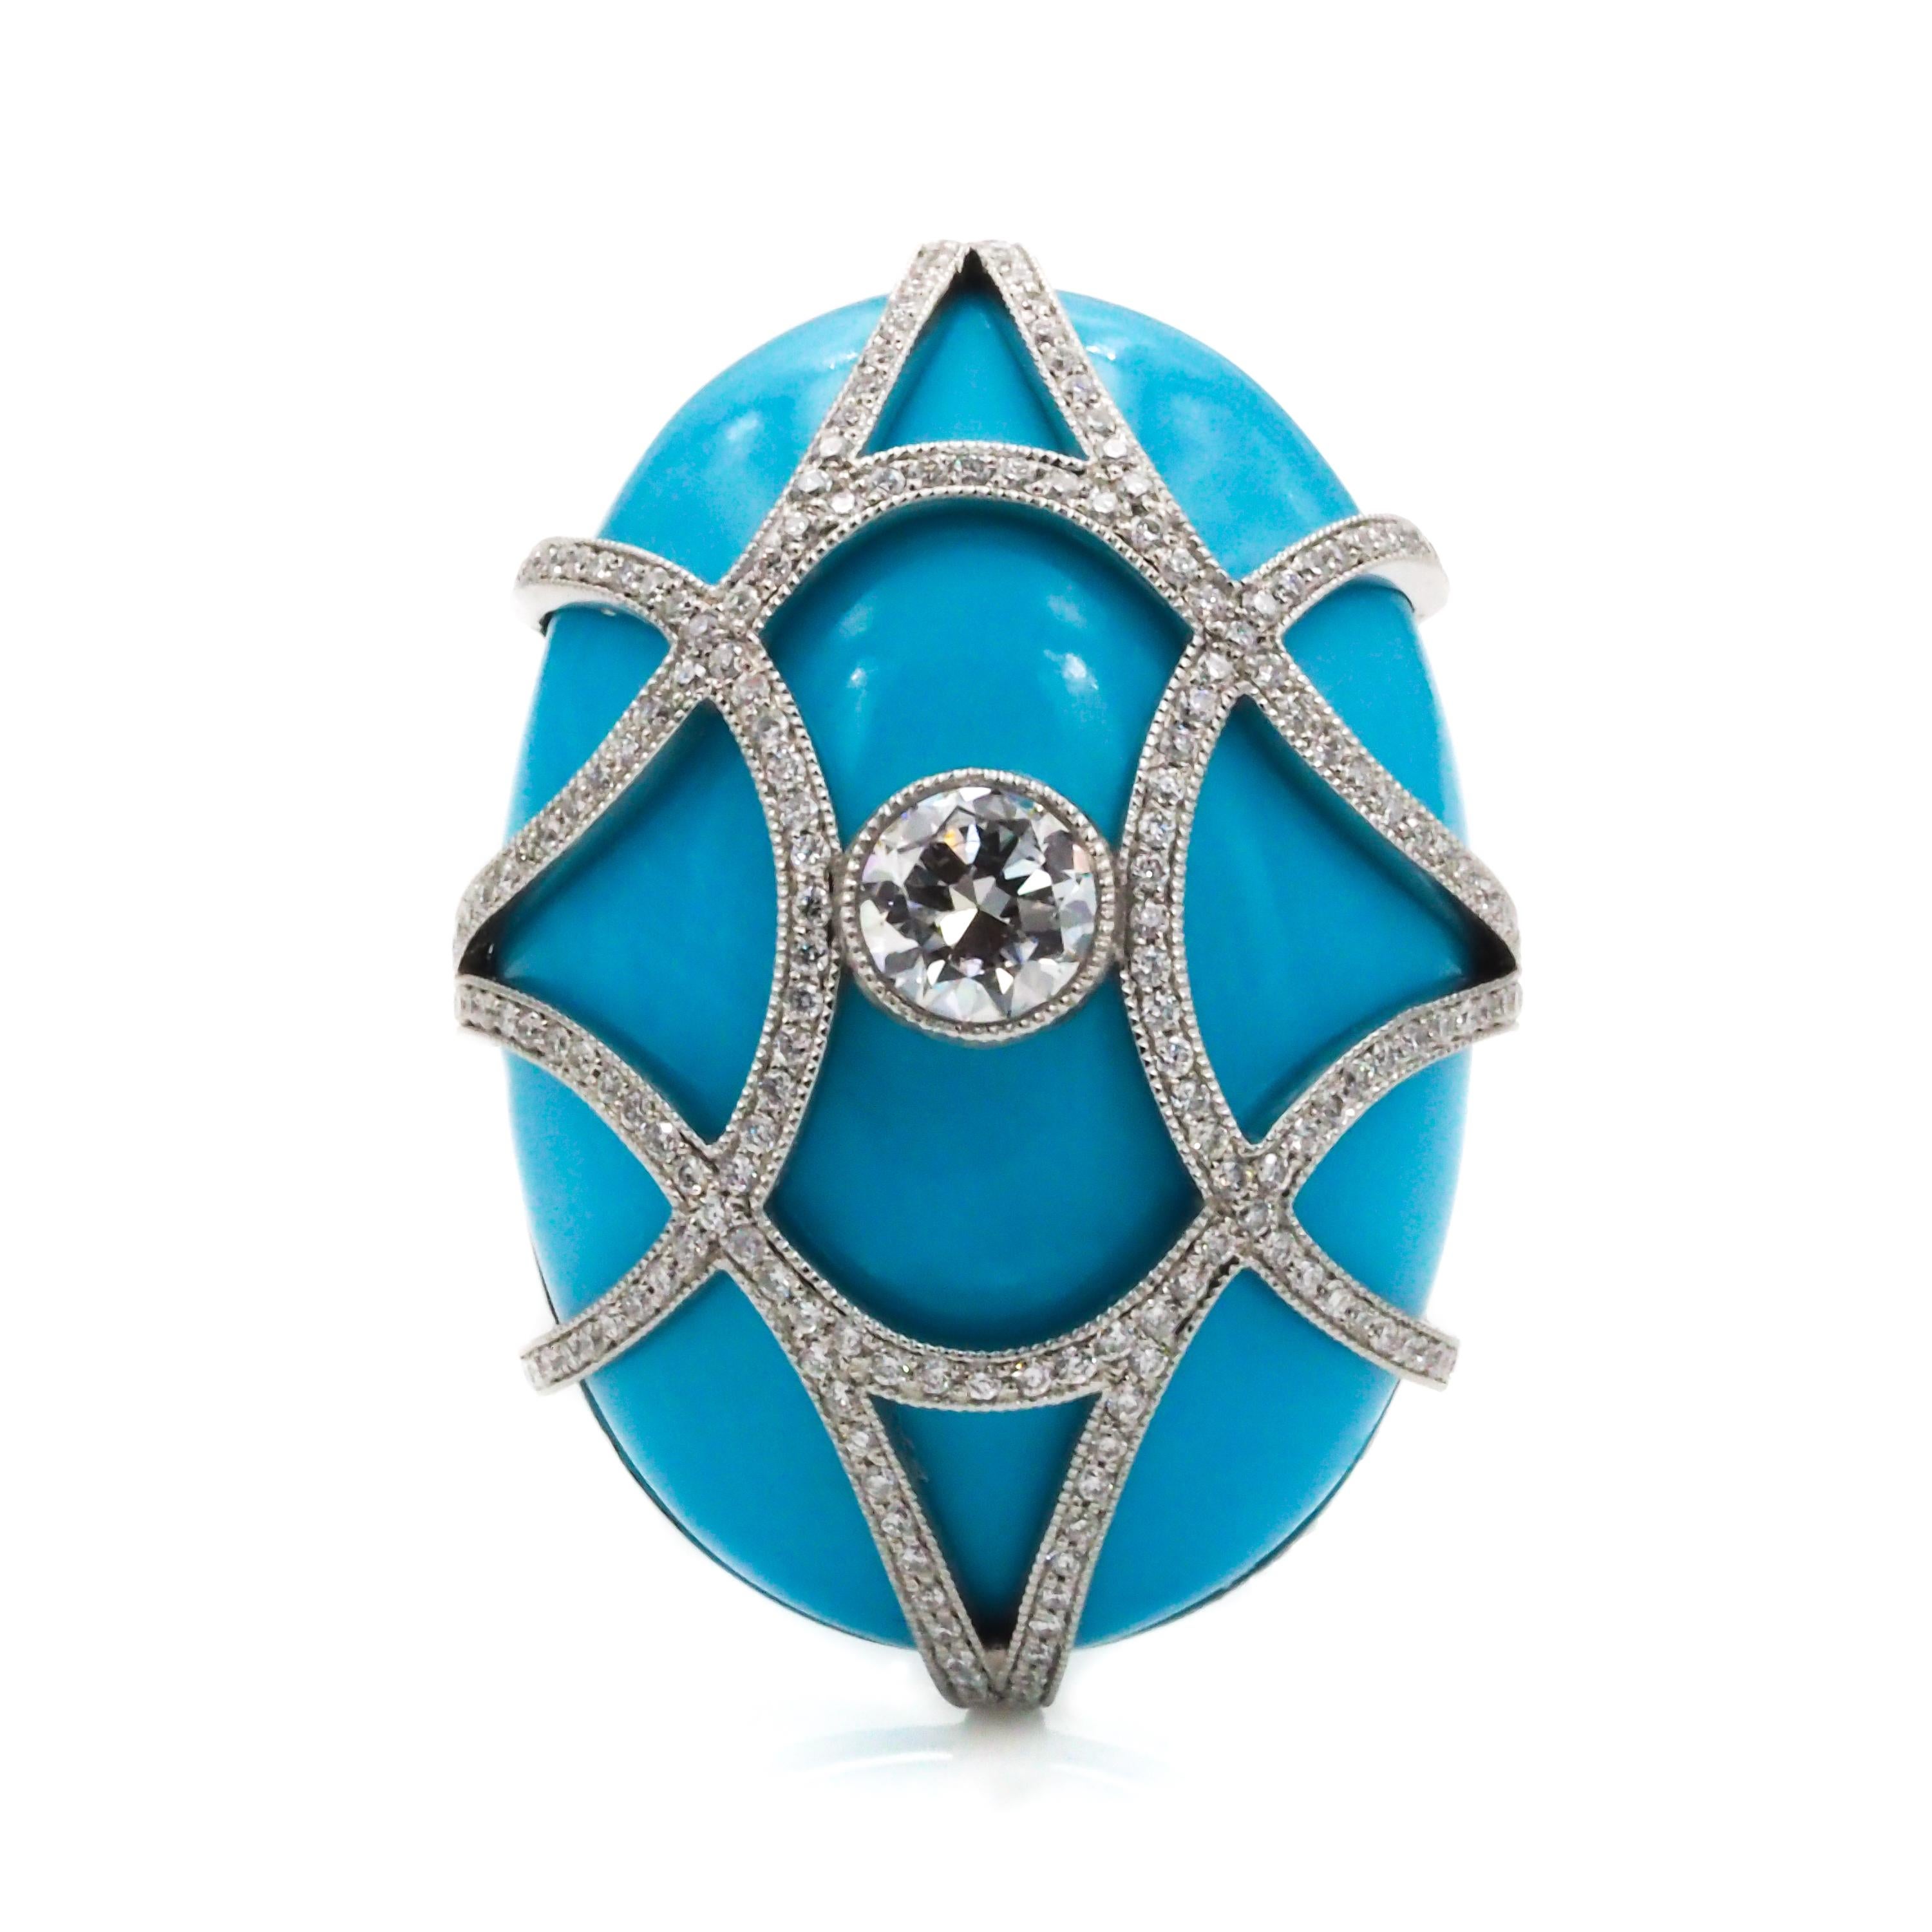 This stunning platinum cocktail ring features a large cabochon oval turquoise within a cage of diamonds. 

Turquoise: 45.68ct
Center Diamond: 0.36ct
Melee Diamonds: 0.68ct
Metal: Platinum
Ring Size: 6 (can be resized)

Original piece by Cicada,